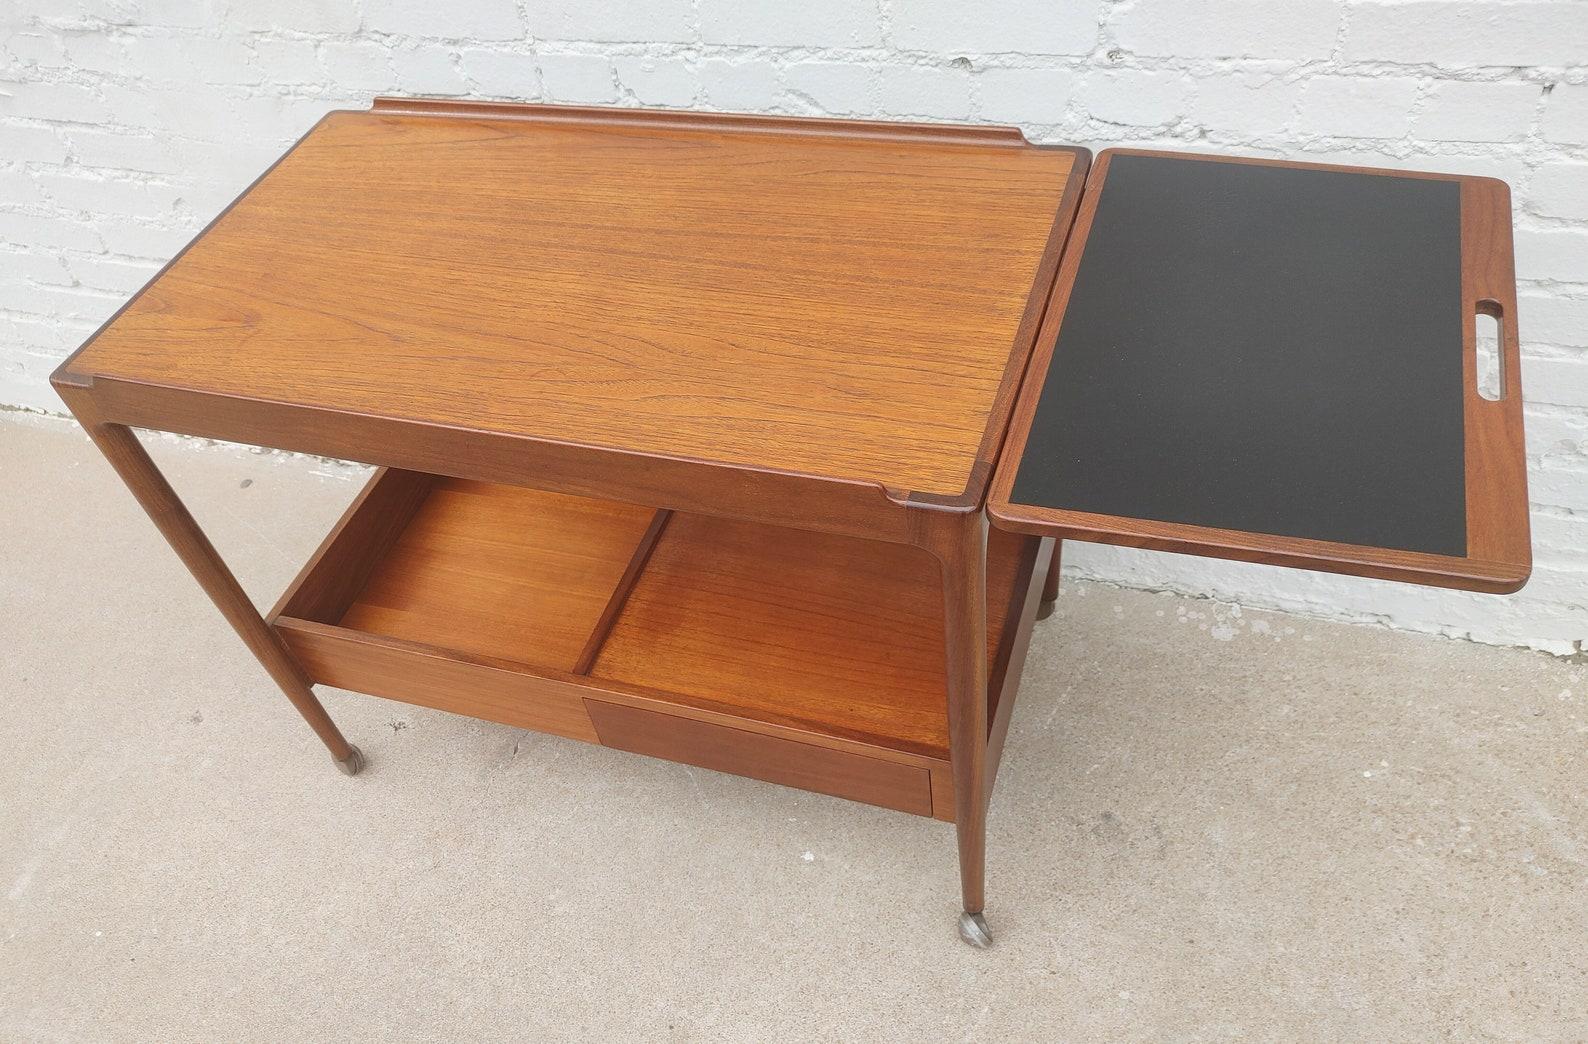 Mid Century Danish Modern Teak Rolling Bar by Kofod Larsen

Above average vintage condition and structurally sound. Has some expected slight finish wear and scratching. Outdoor listing pictures might appear slightly darker or more red than the item